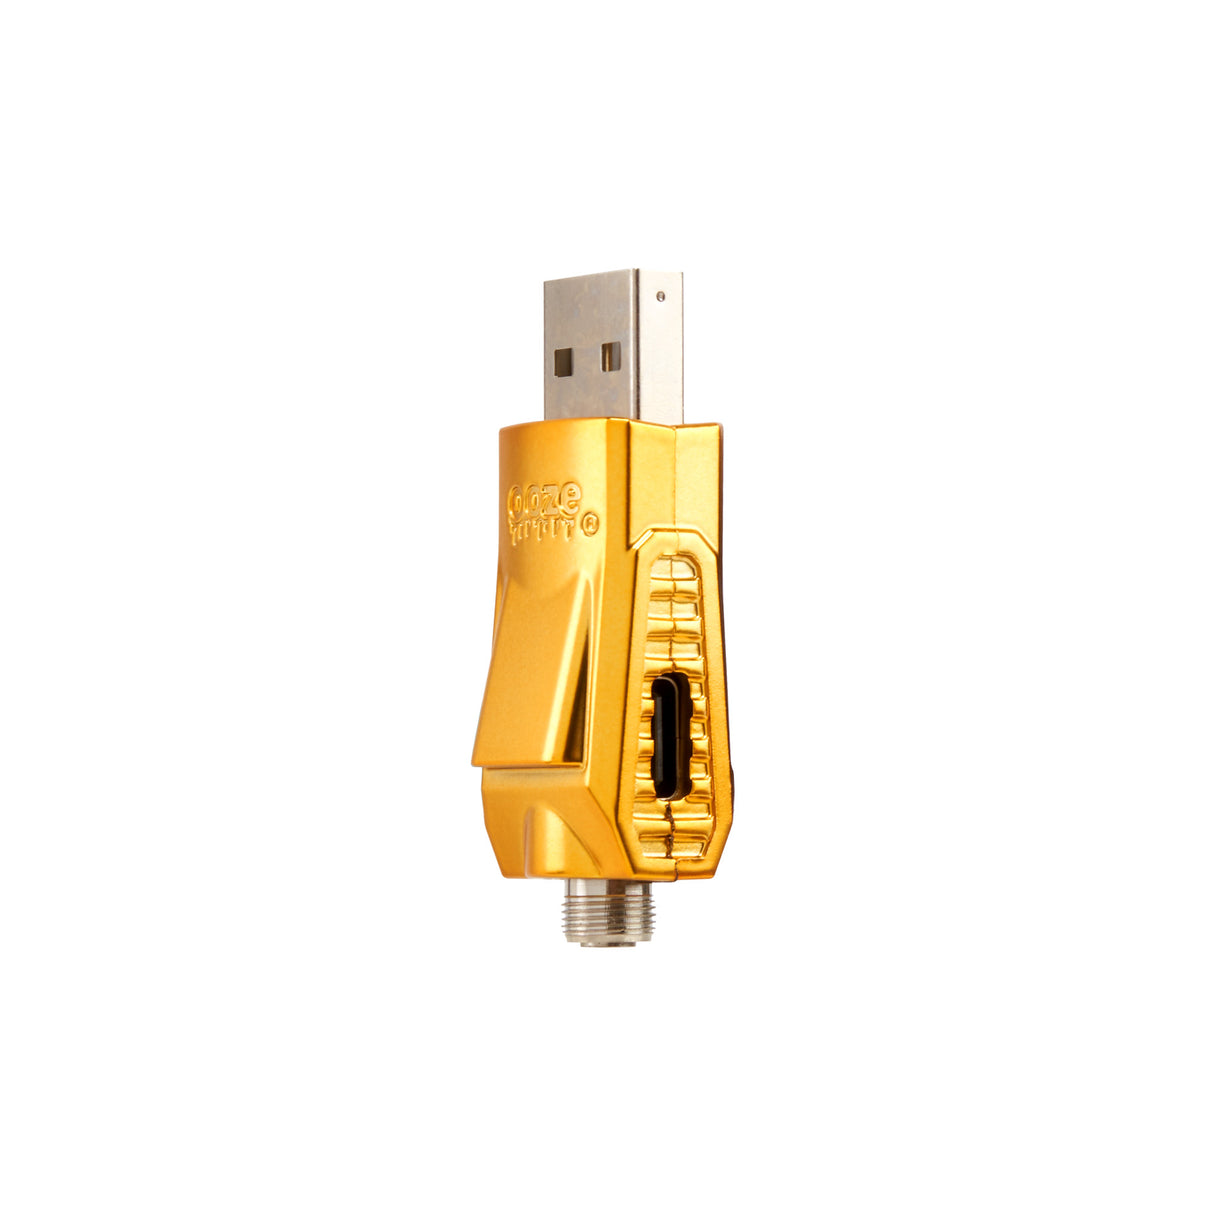 Bolt Charger – 510 Charger with Type-C Port - Gold